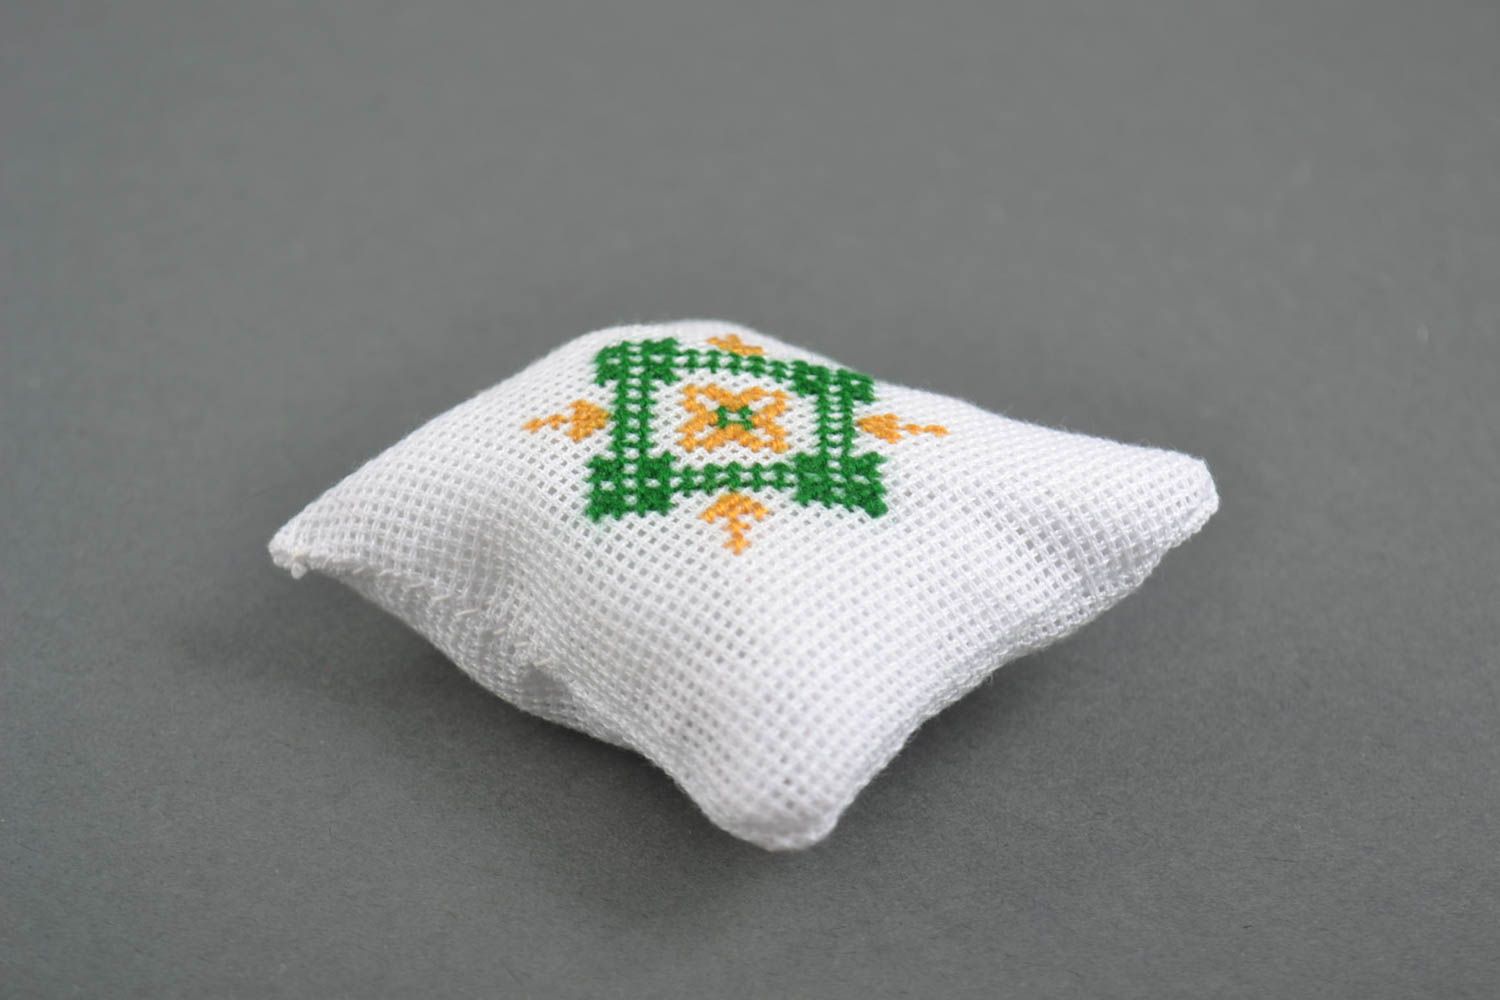 Handmade pincushion embroidery supplies needle holder sewing accessories photo 4